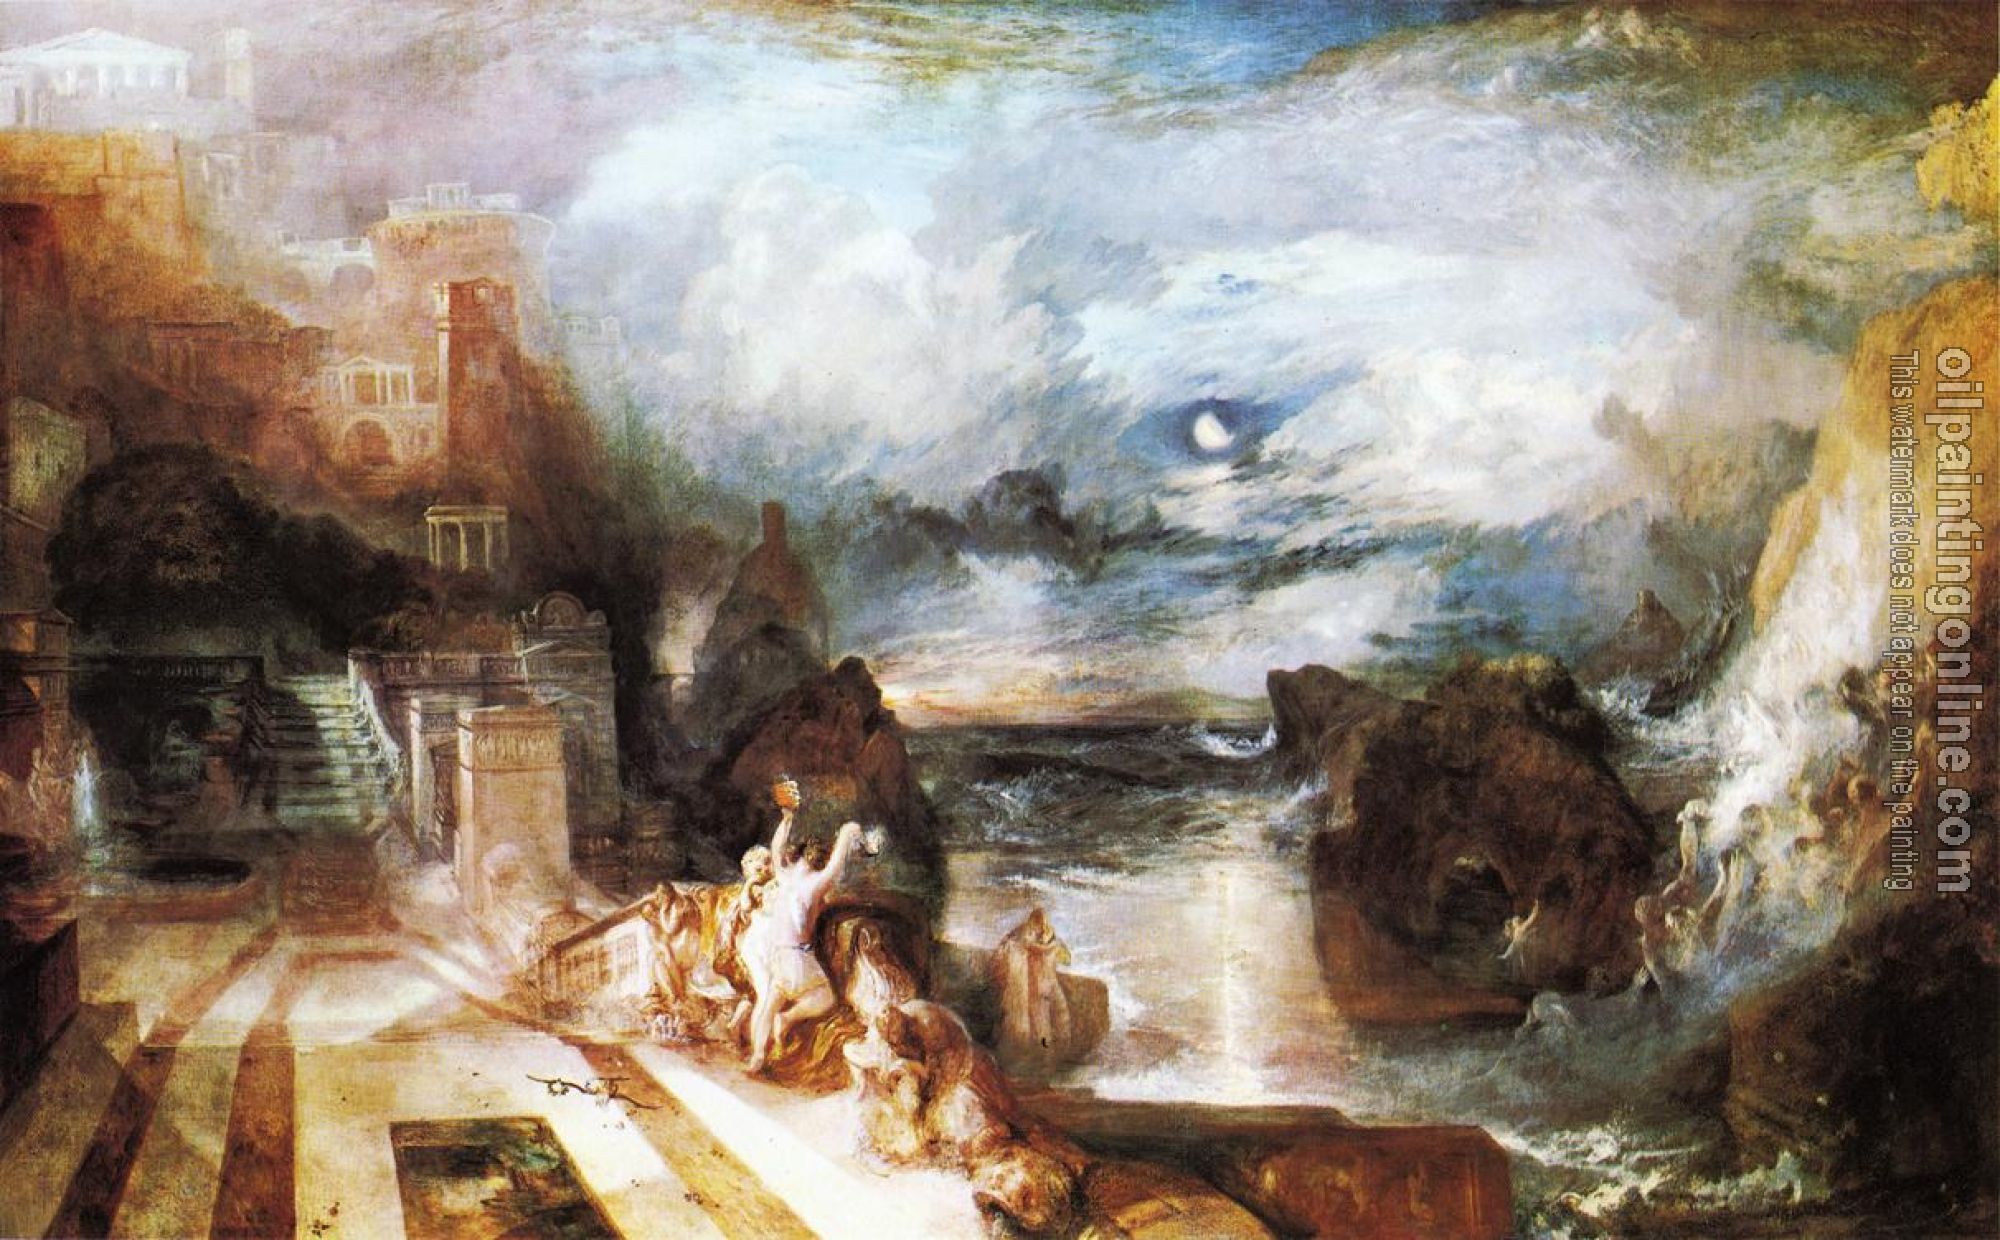 Turner, Joseph Mallord William - The Parting of Hero and Leander from the Greek of Musaeus